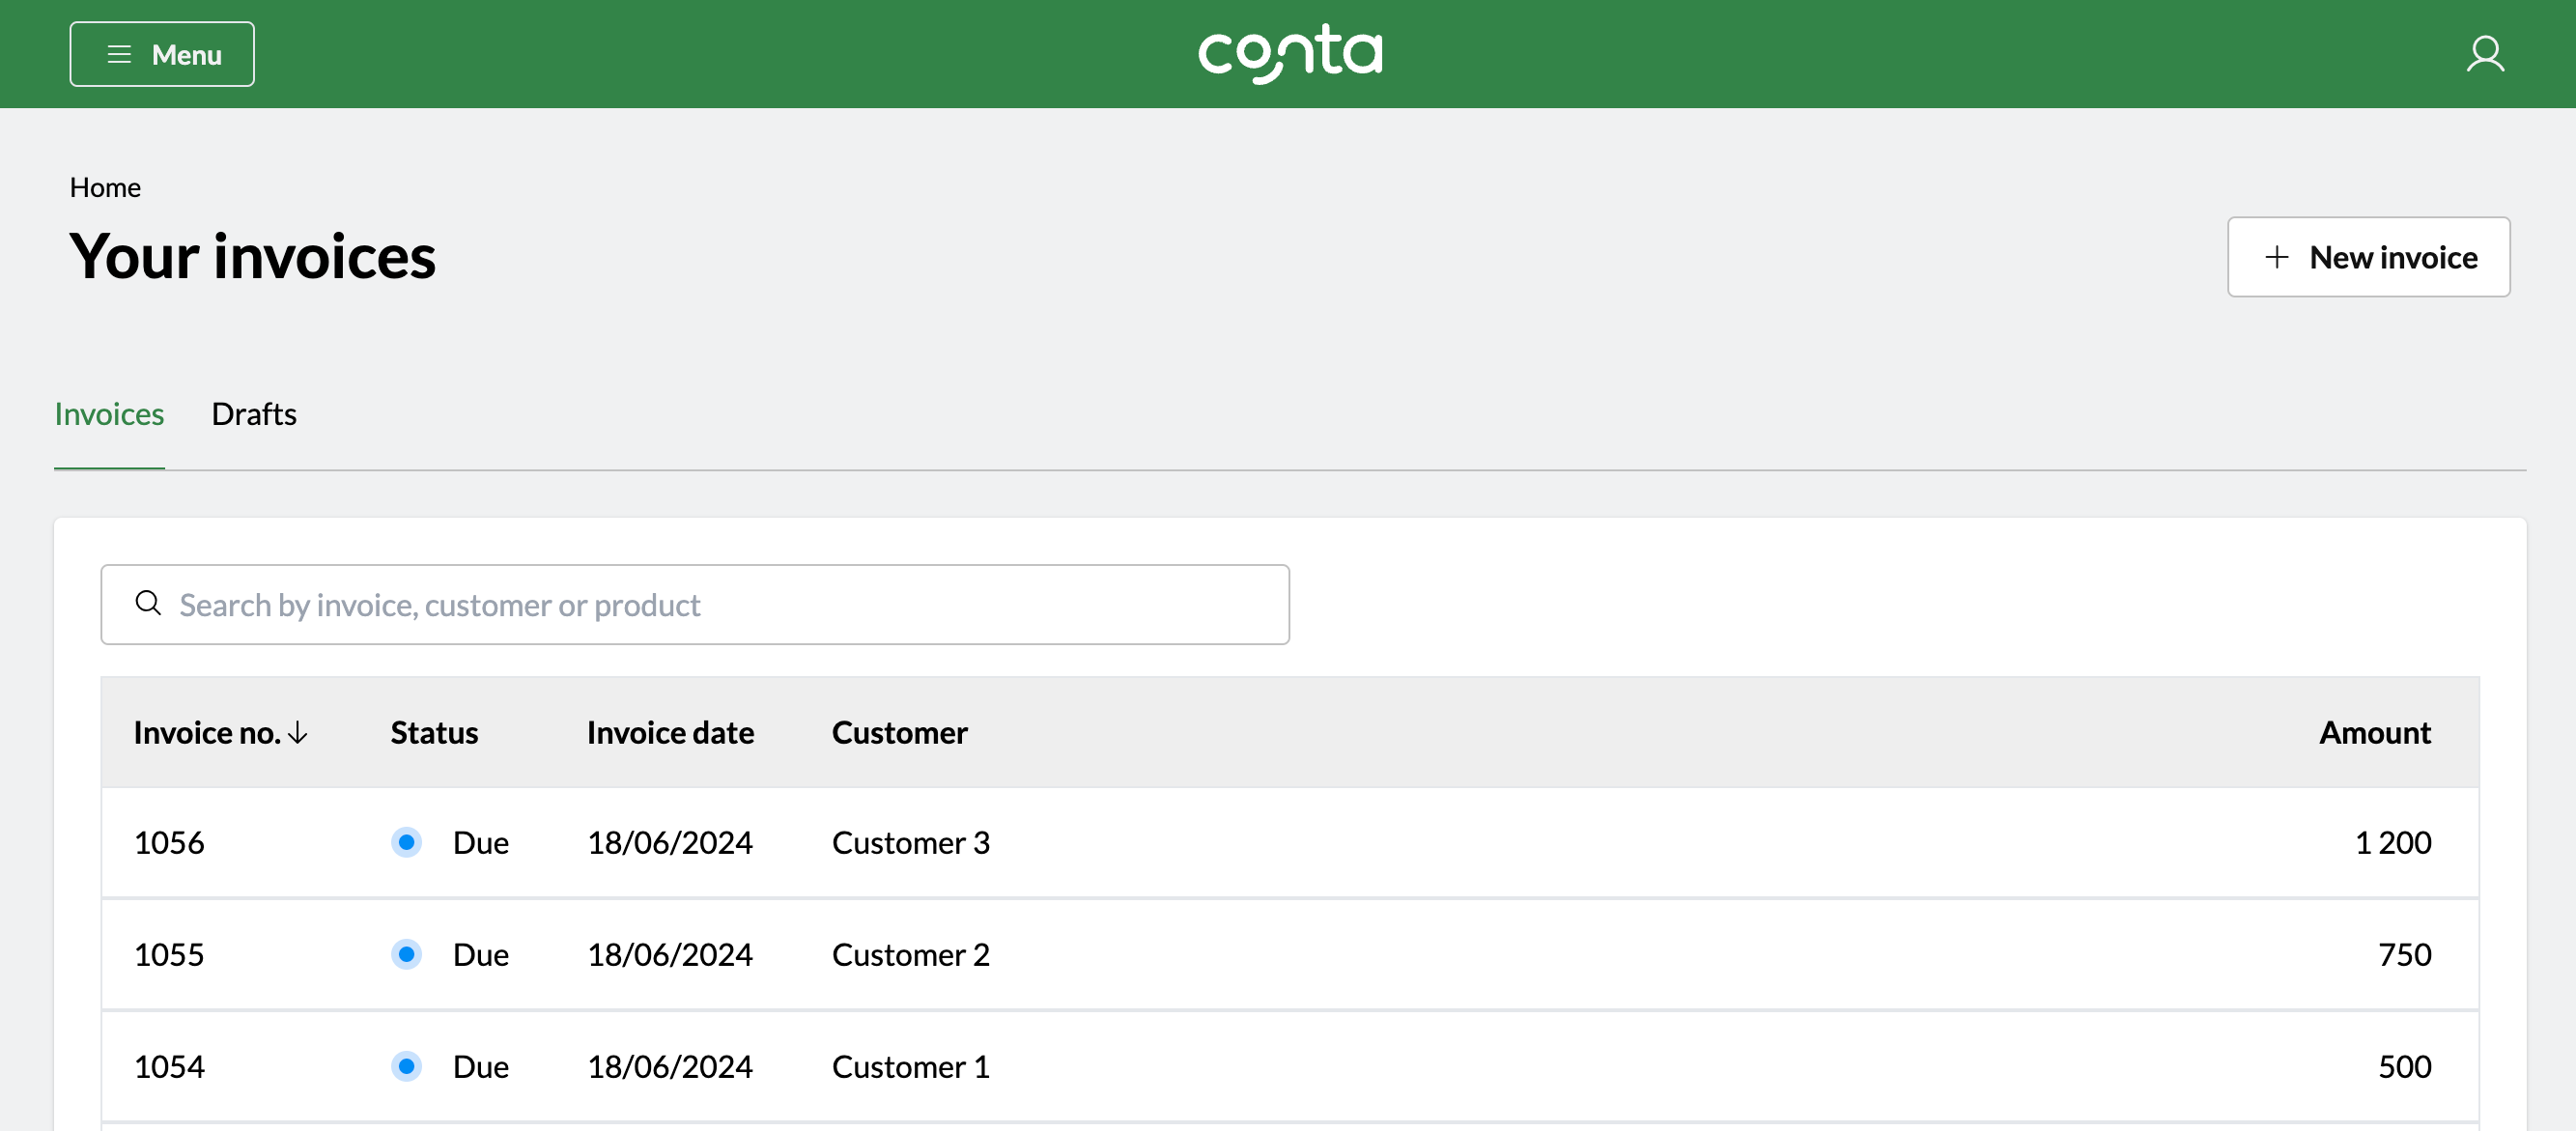 The invoice overview in Conta, showing all your invoices, their details and their status